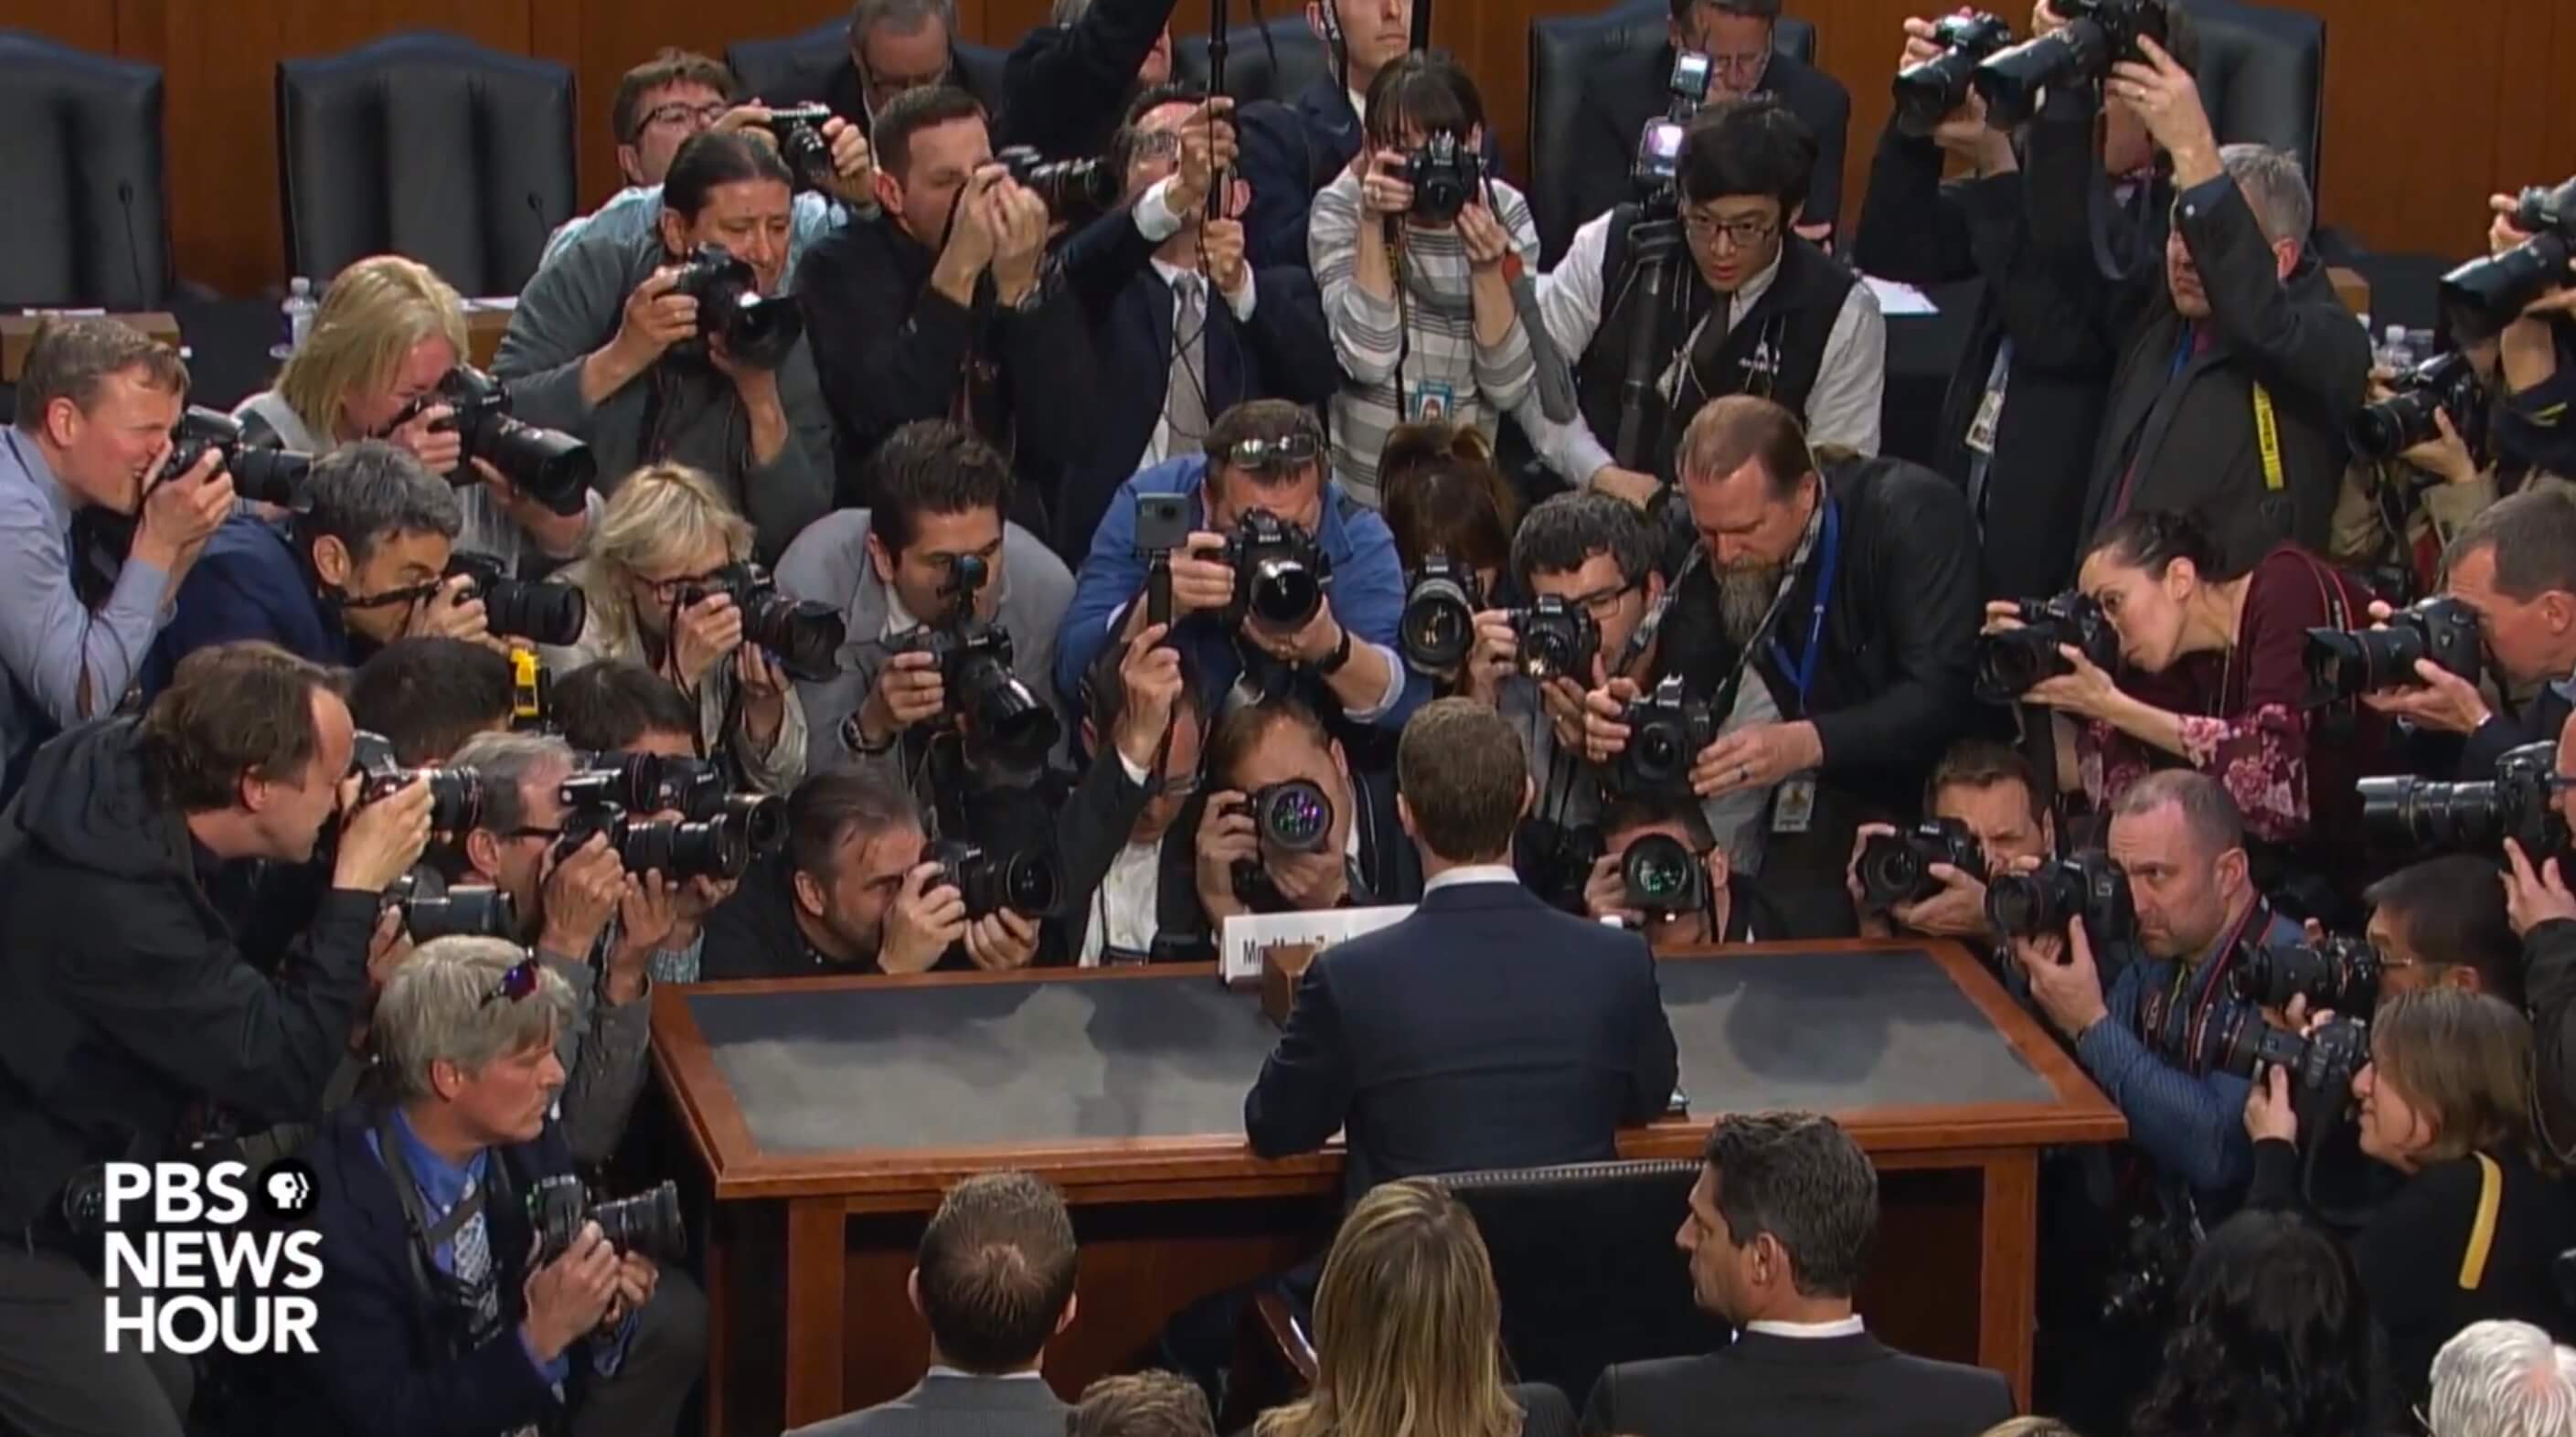 Facebook CEO, Mark Zuckerberg comes out unscathed after first day of congressional hearing